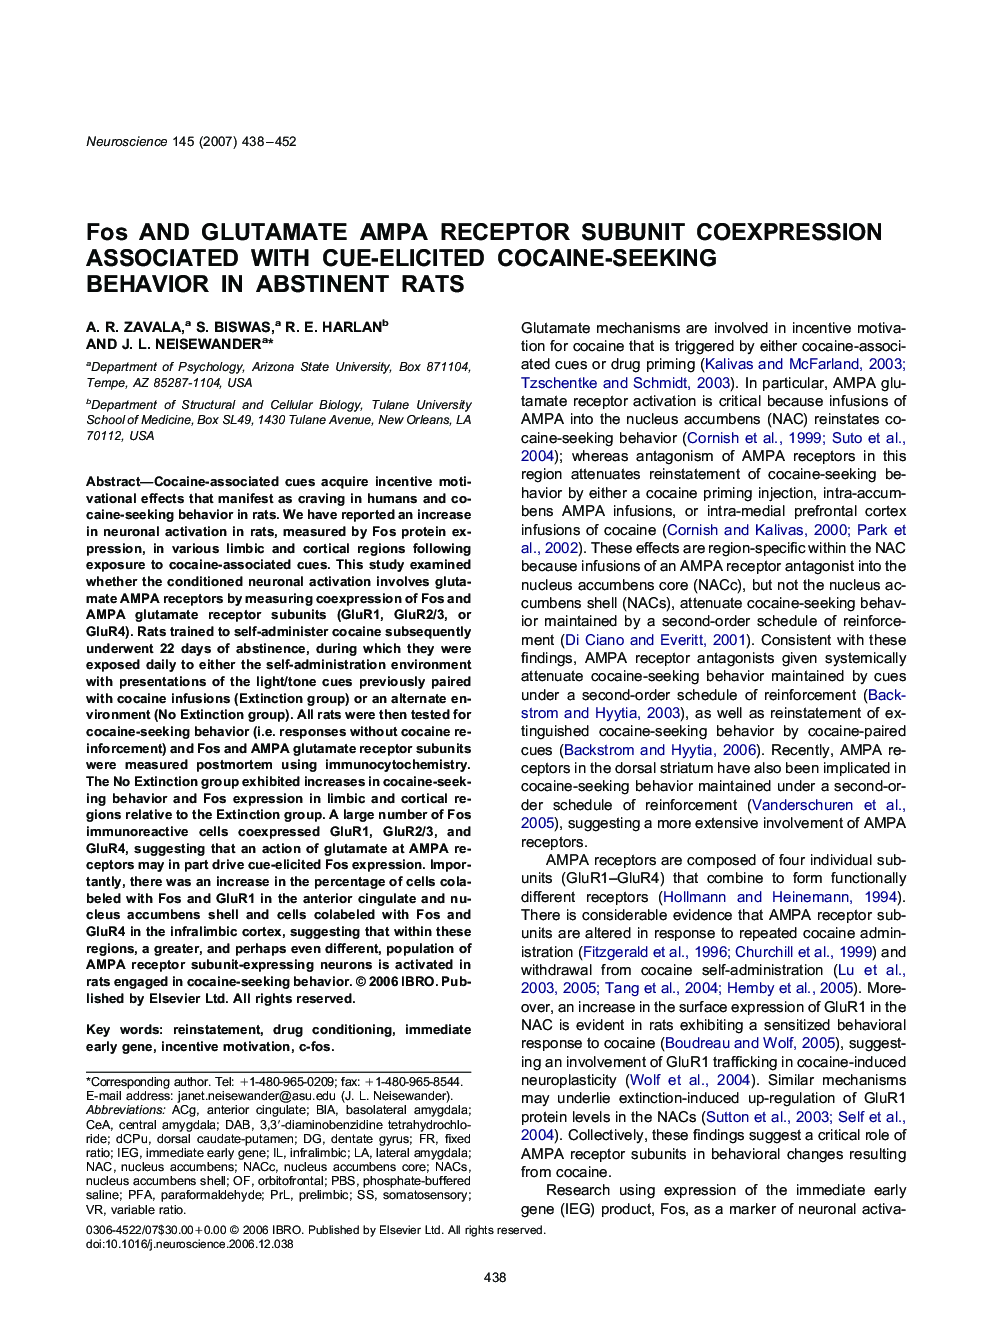 Fos and glutamate AMPA receptor subunit coexpression associated with cue-elicited cocaine-seeking behavior in abstinent rats